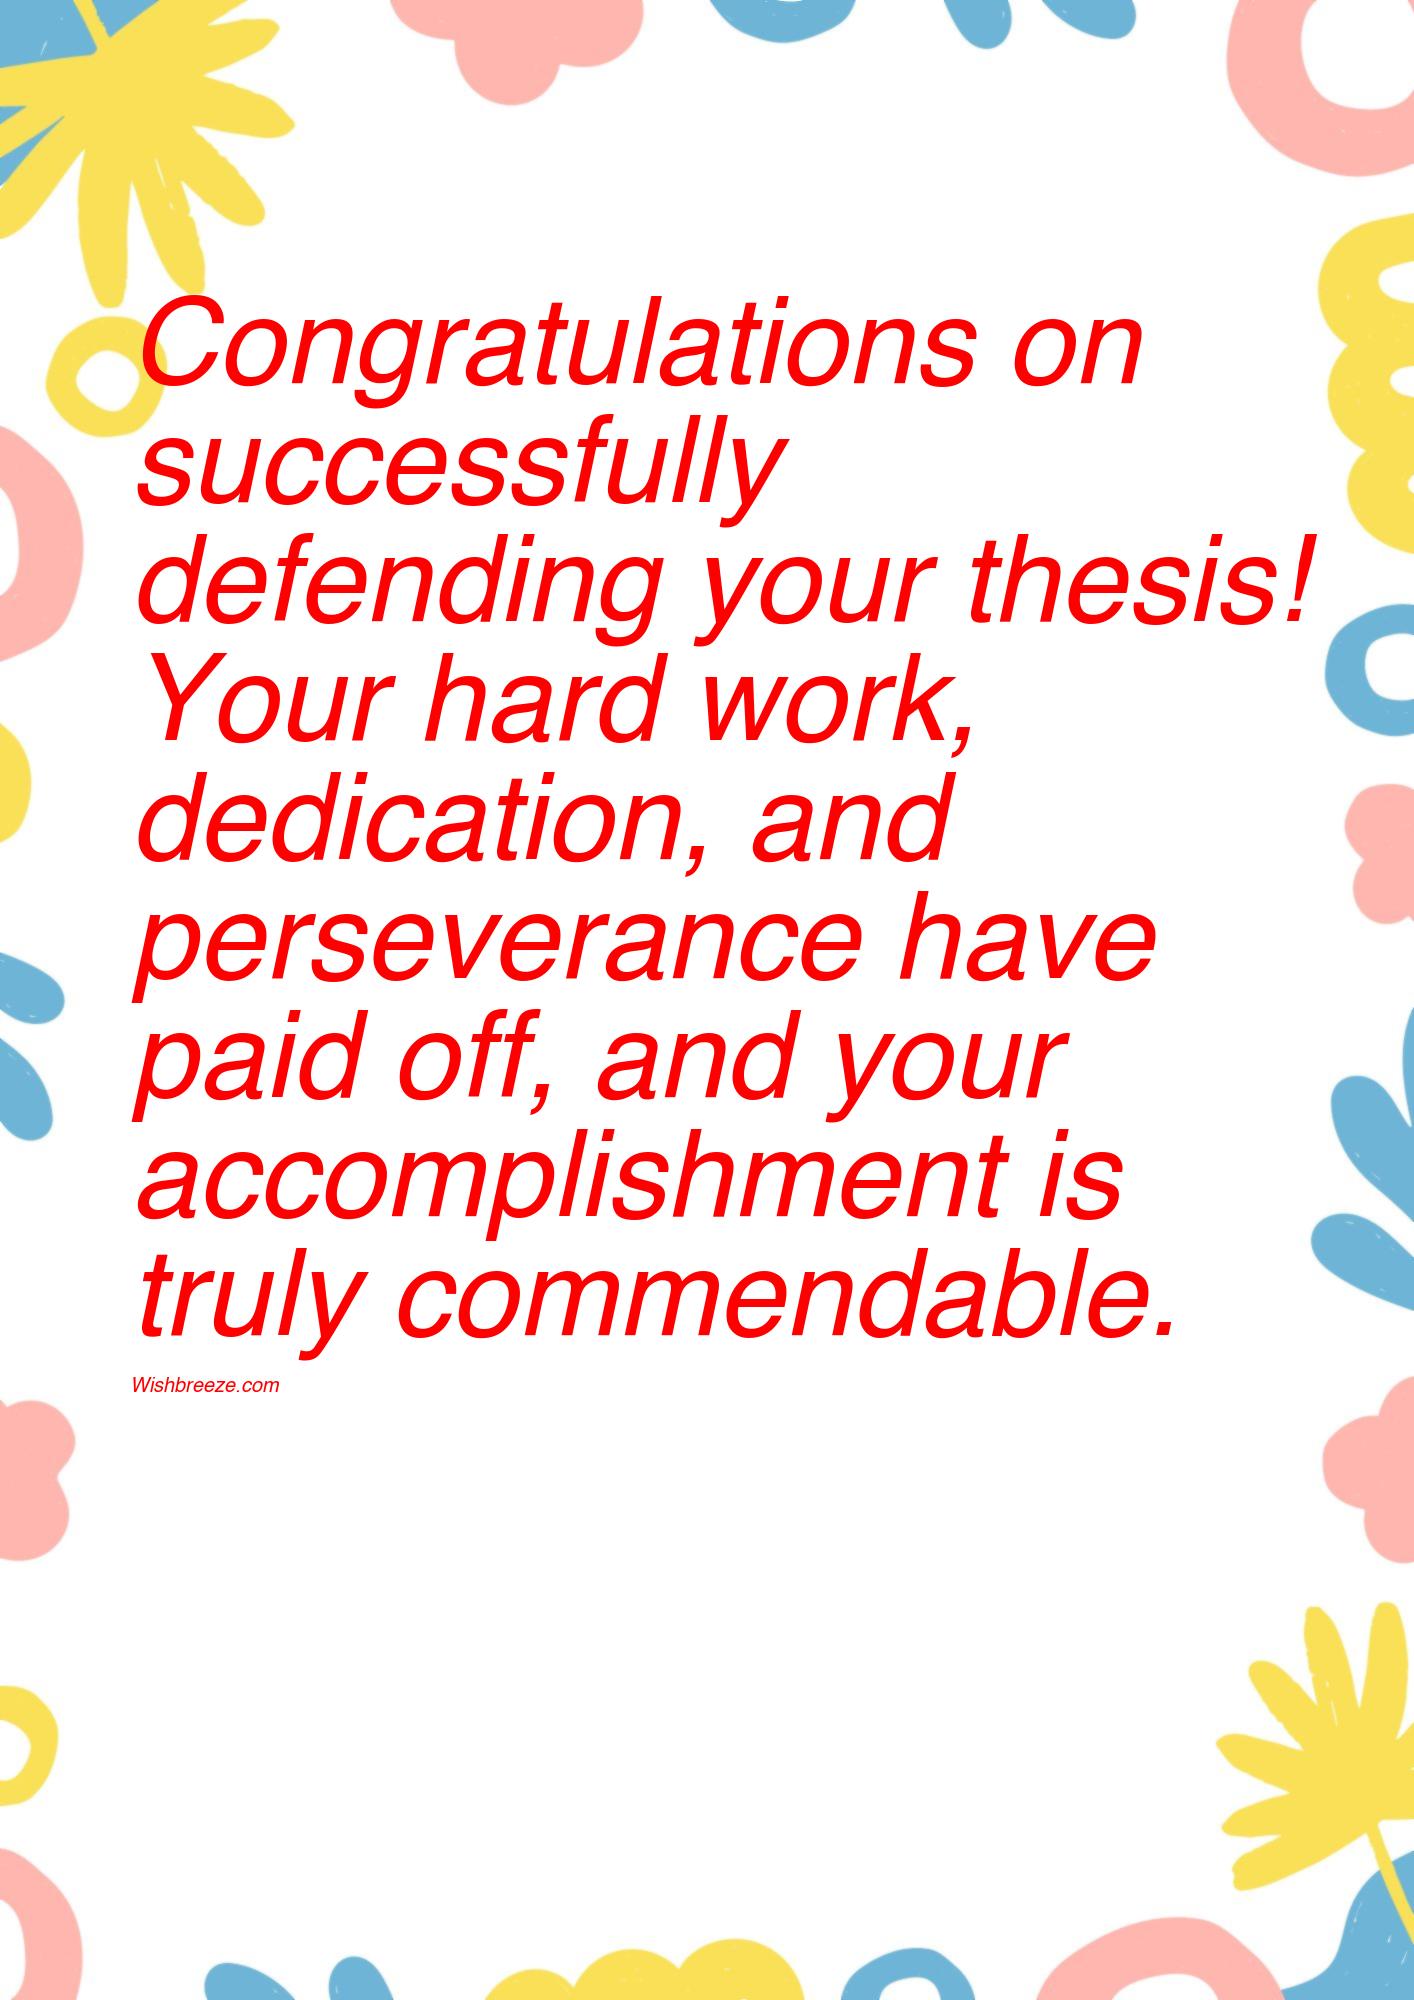 congratulations on submitting your thesis